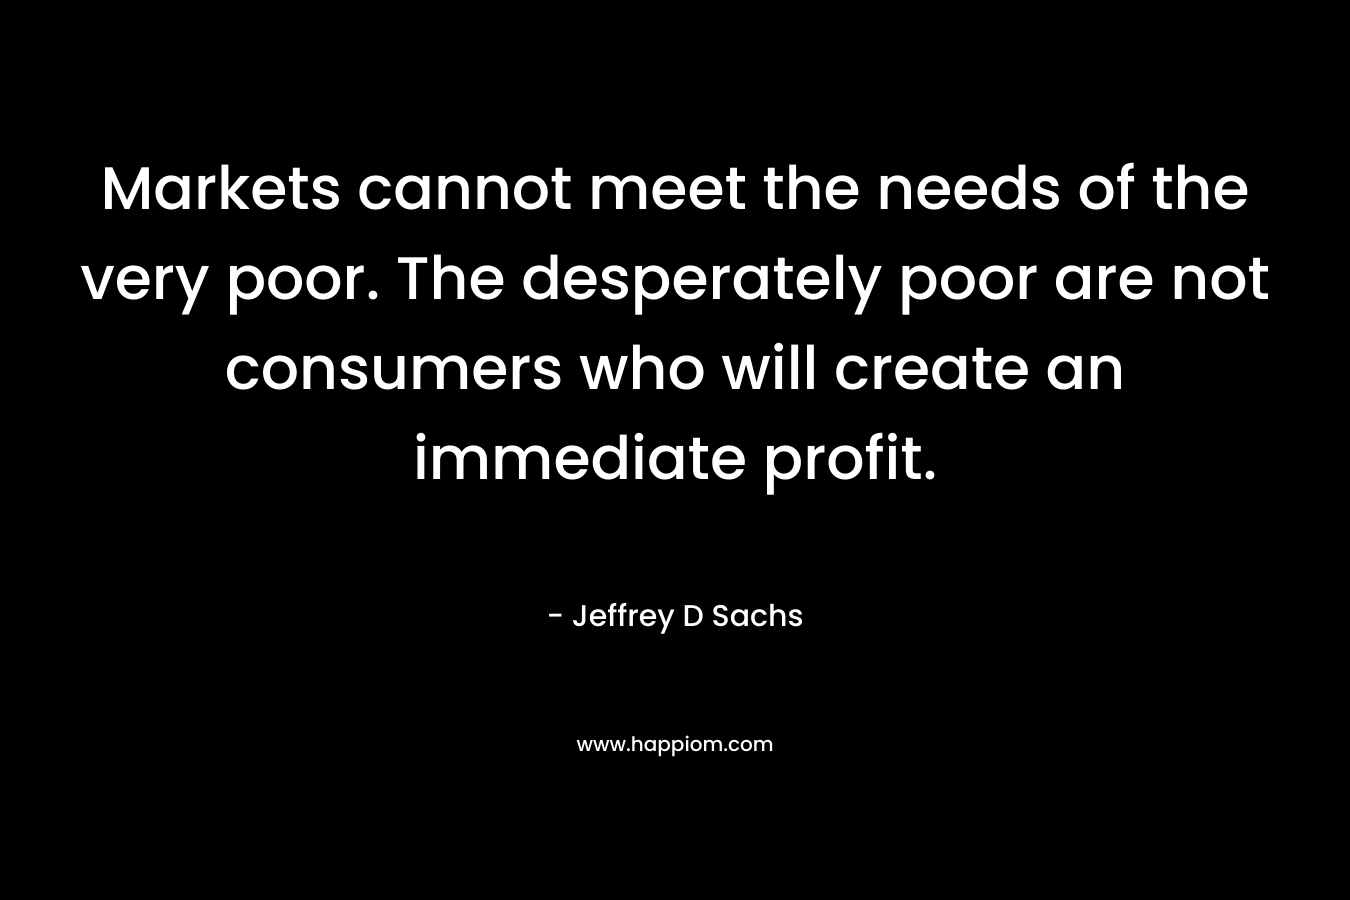 Markets cannot meet the needs of the very poor. The desperately poor are not consumers who will create an immediate profit. – Jeffrey D Sachs